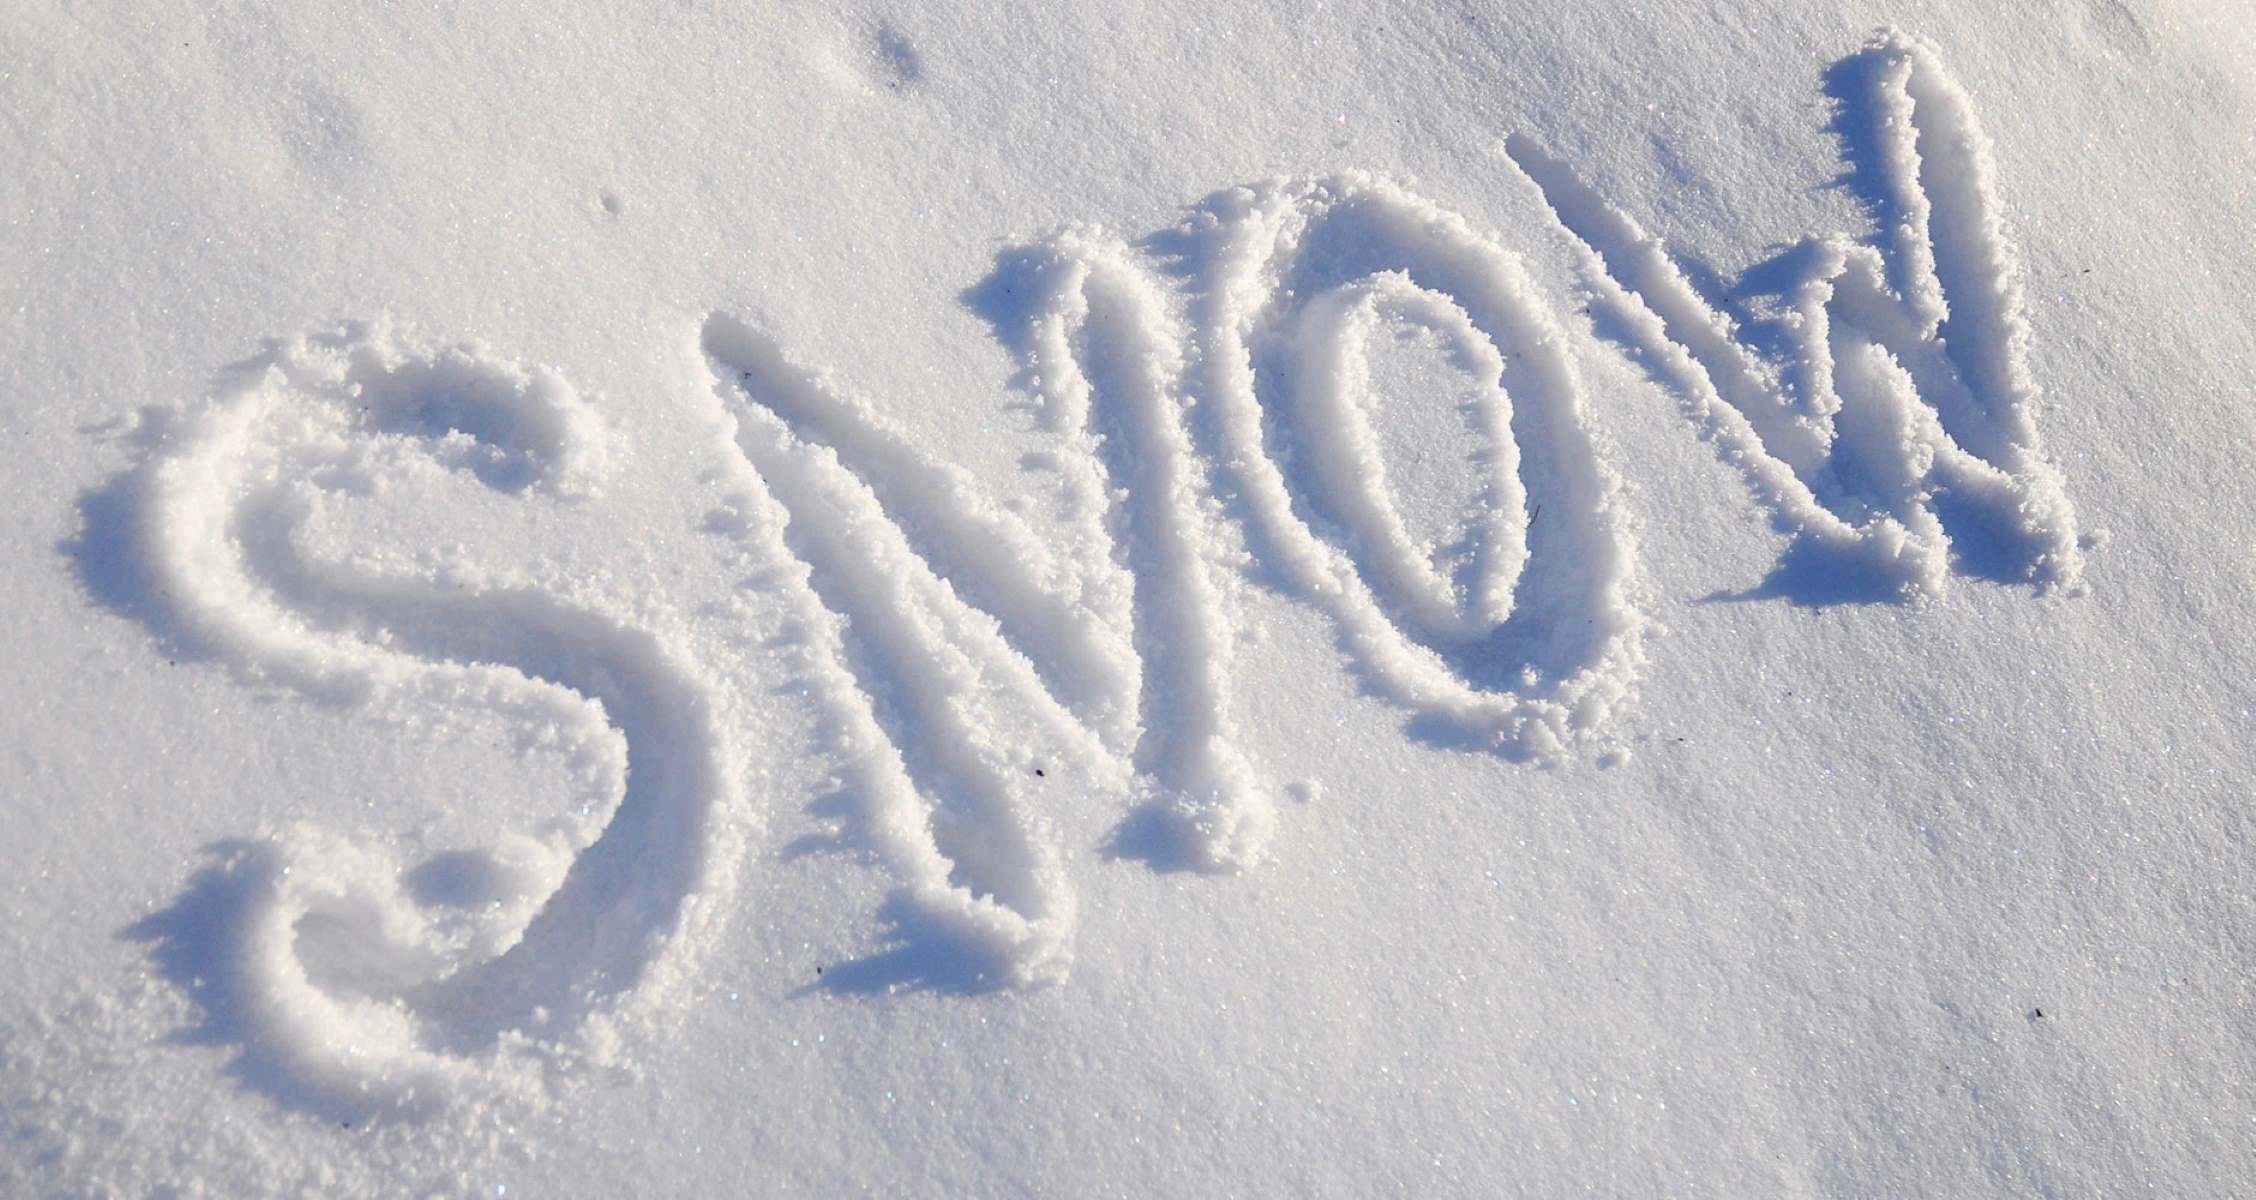 10 Fascinating Words For Snow In Different Languages